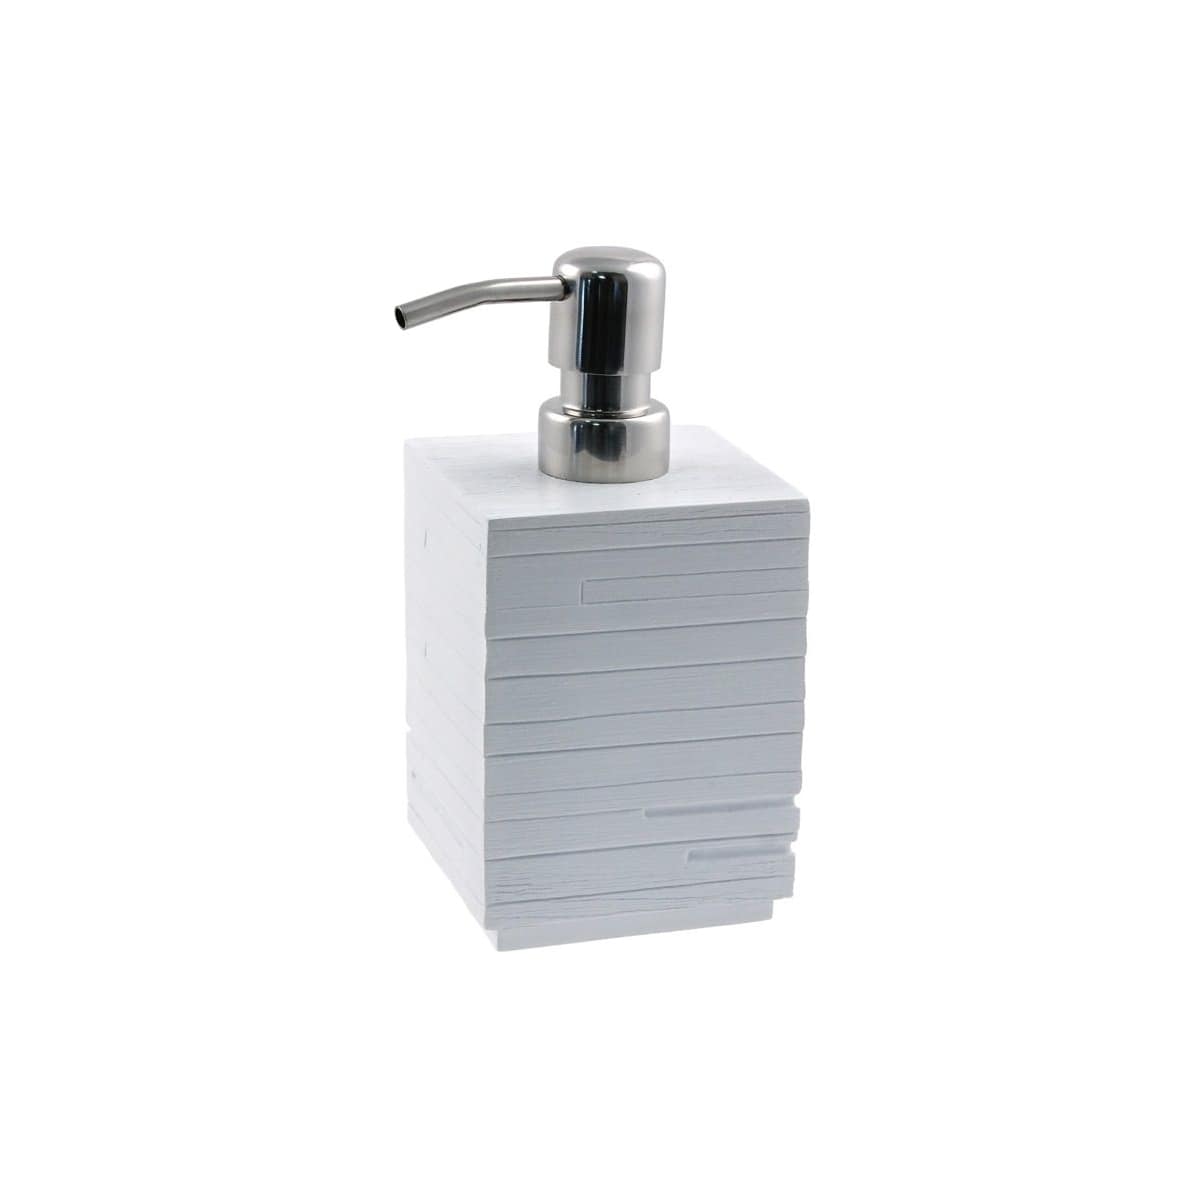 Gedy GEDYTI81-02 TI81-02 Designer Hand Soap Dispenser-White and Glass TI81-02 Wh 